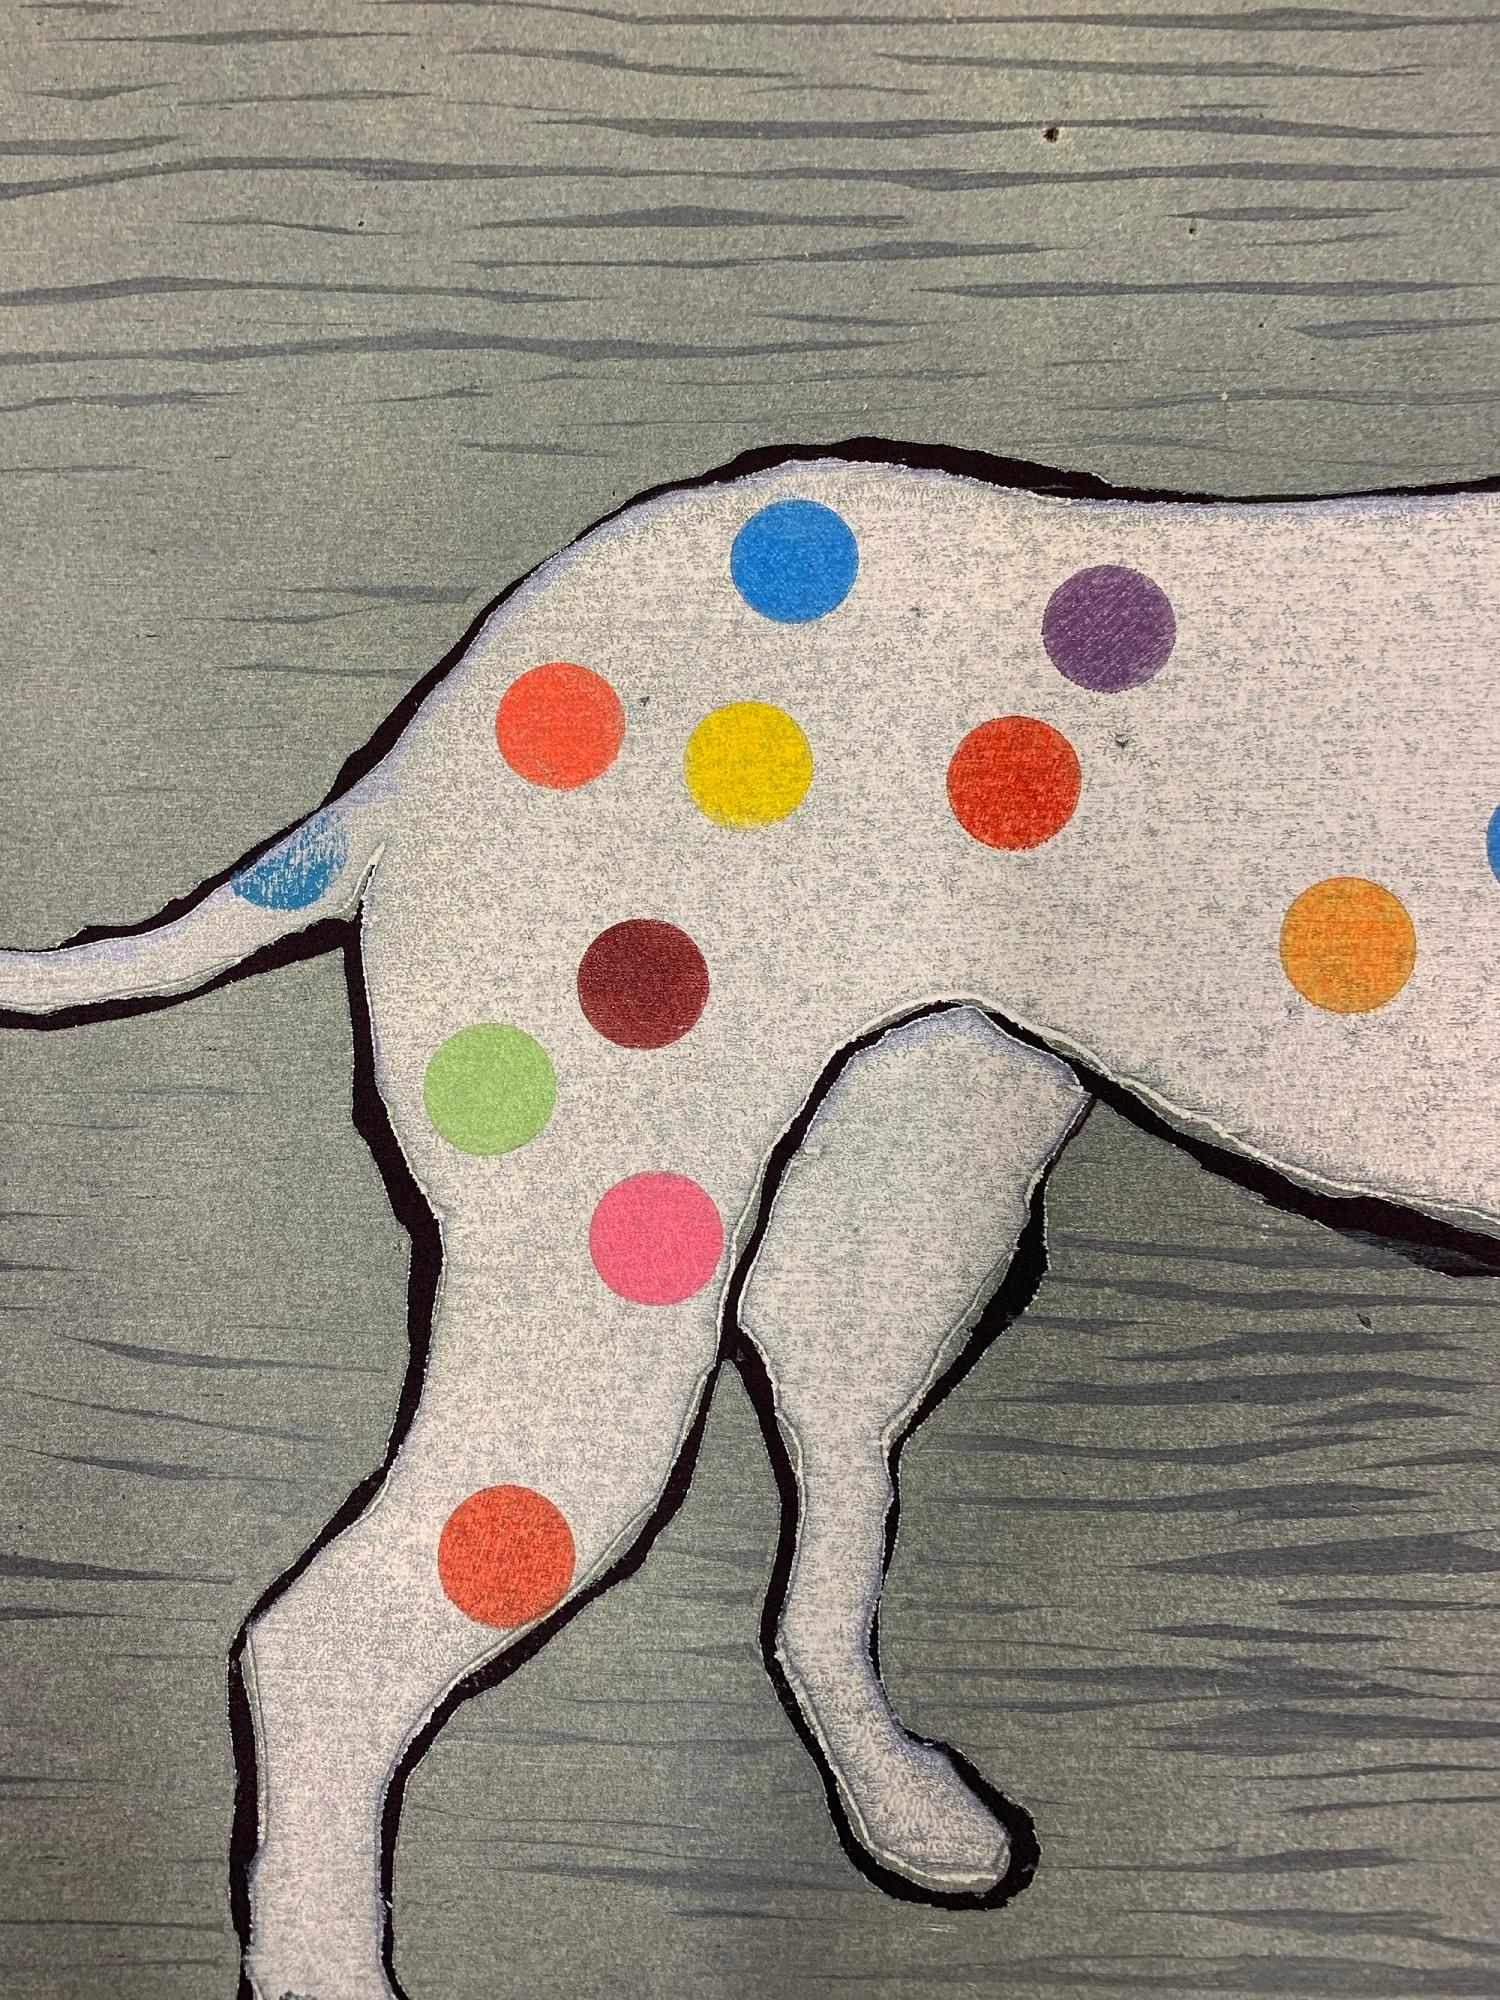 Damien Hirst's Dog, Pictures of Famous Artist's Pets, Damien Hirst Spots Style For Sale 1